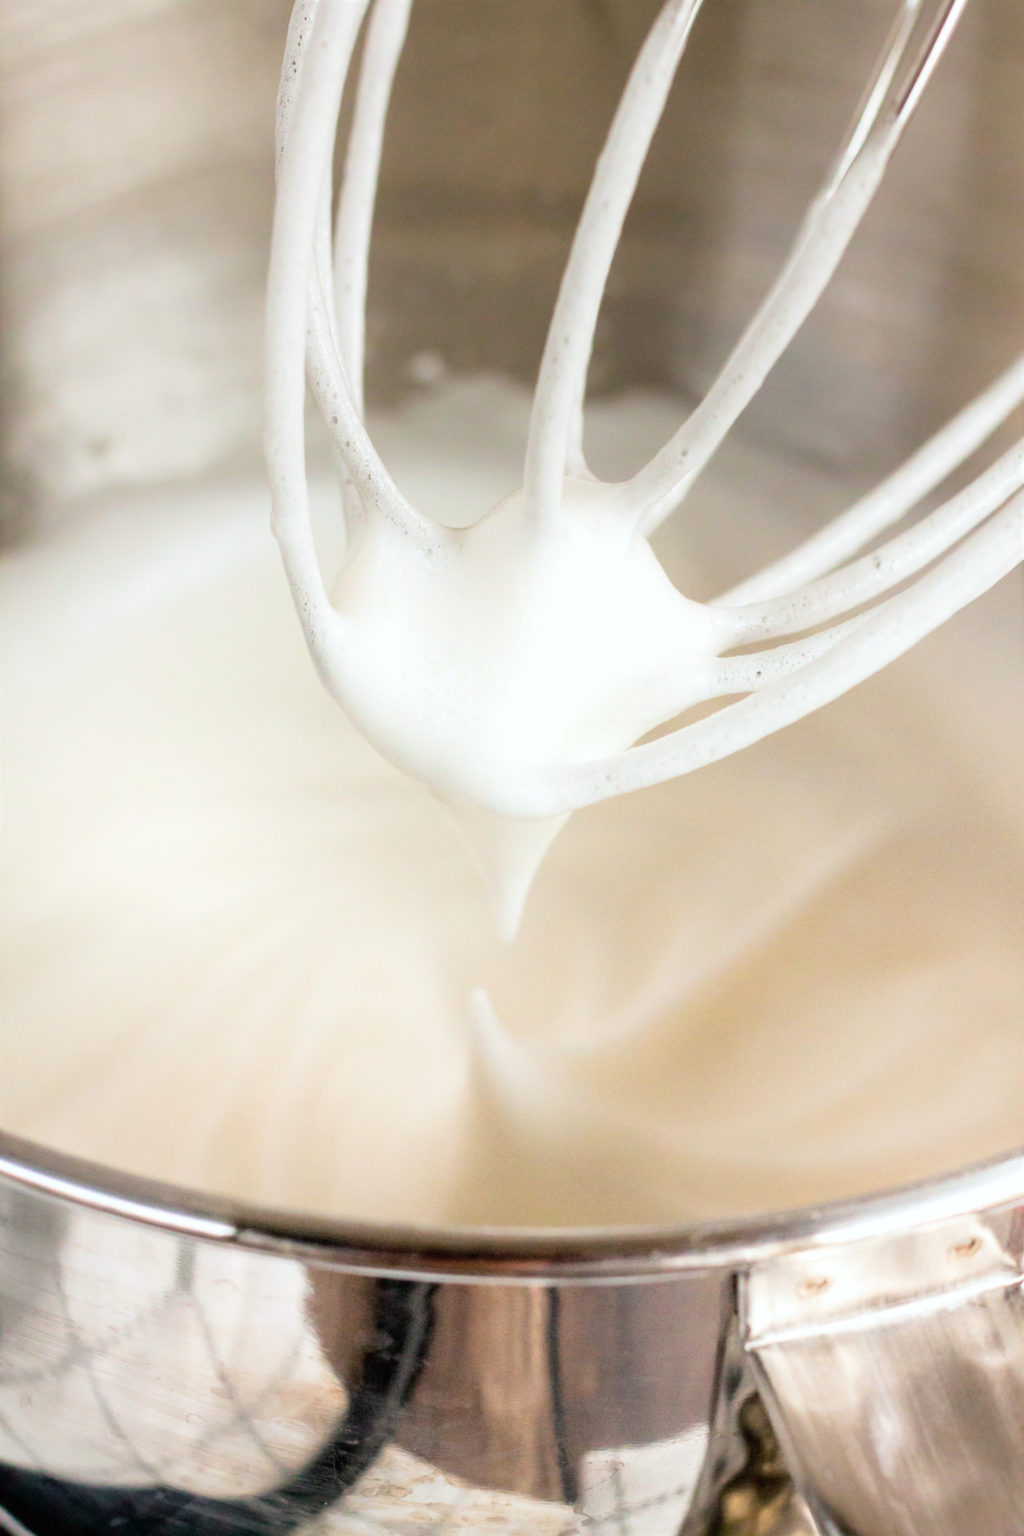 Whipped egg mixture is shown inside the electric mixer bowl, a whisk attachment is used. 